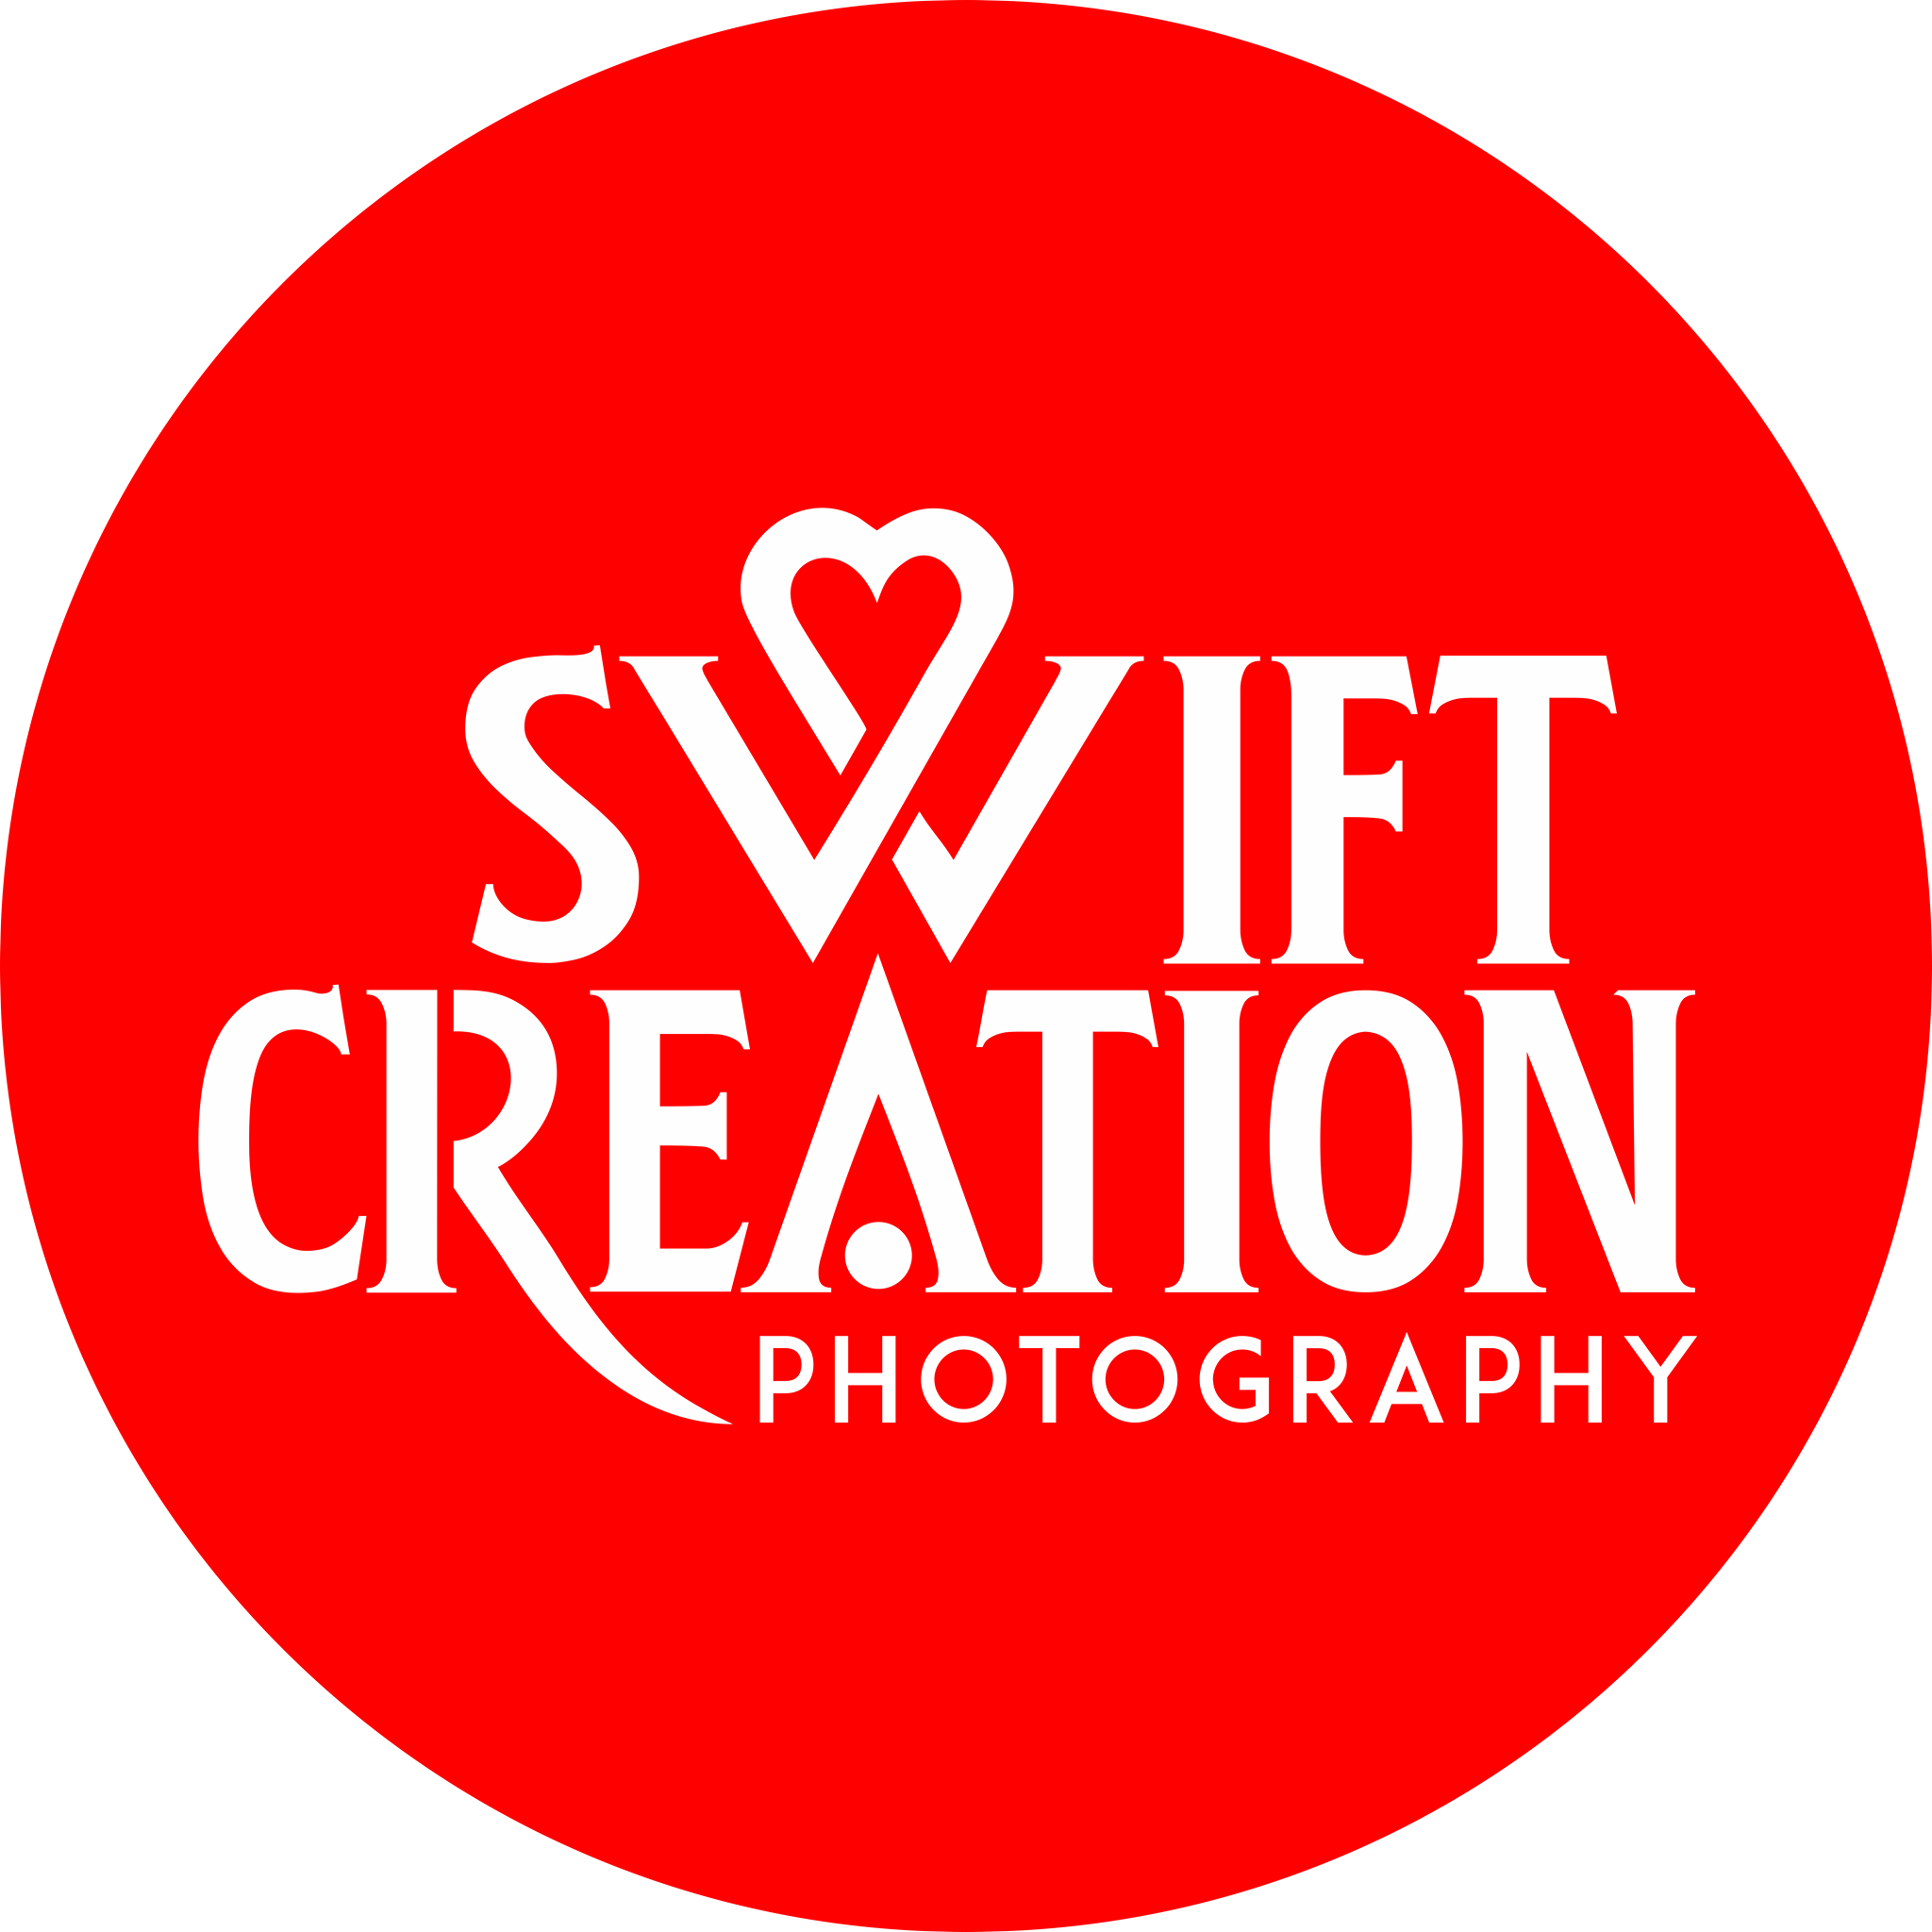 Swift Creation Photography|Photographer|Event Services